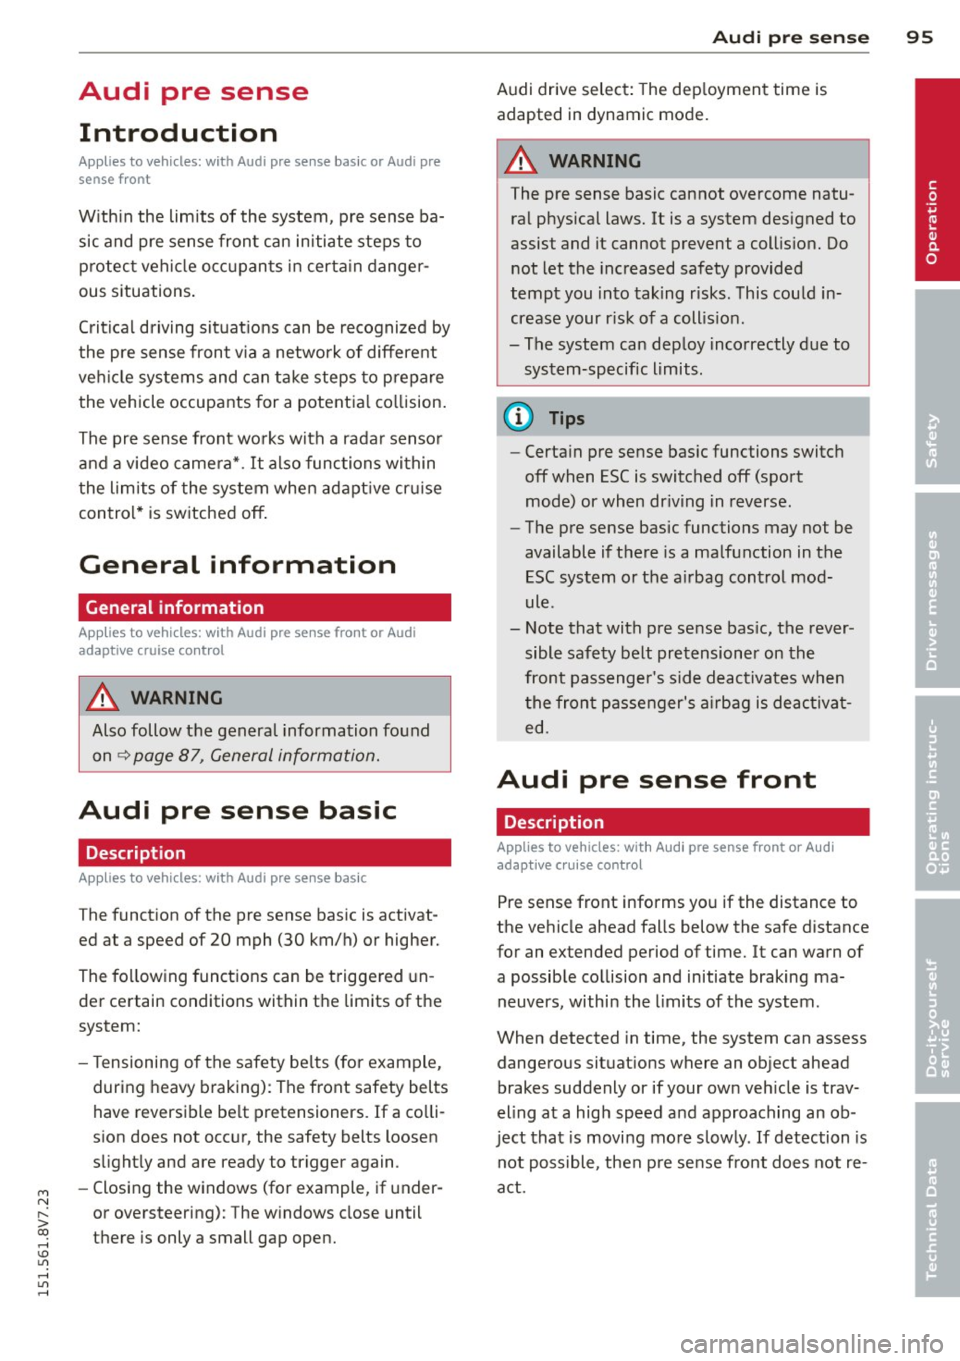 AUDI A3 CABRIOLET 2015  Owners Manual M N ,.... 
> co ,...., \!) 1.11 ,...., 1.11 ,...., 
Audi  pre  sense Introduction 
Applies  to  vehicles:  with  Audi pre se nse  basic  or Aud i pre 
sense front 
W ithin  the  limits  of  the  sys